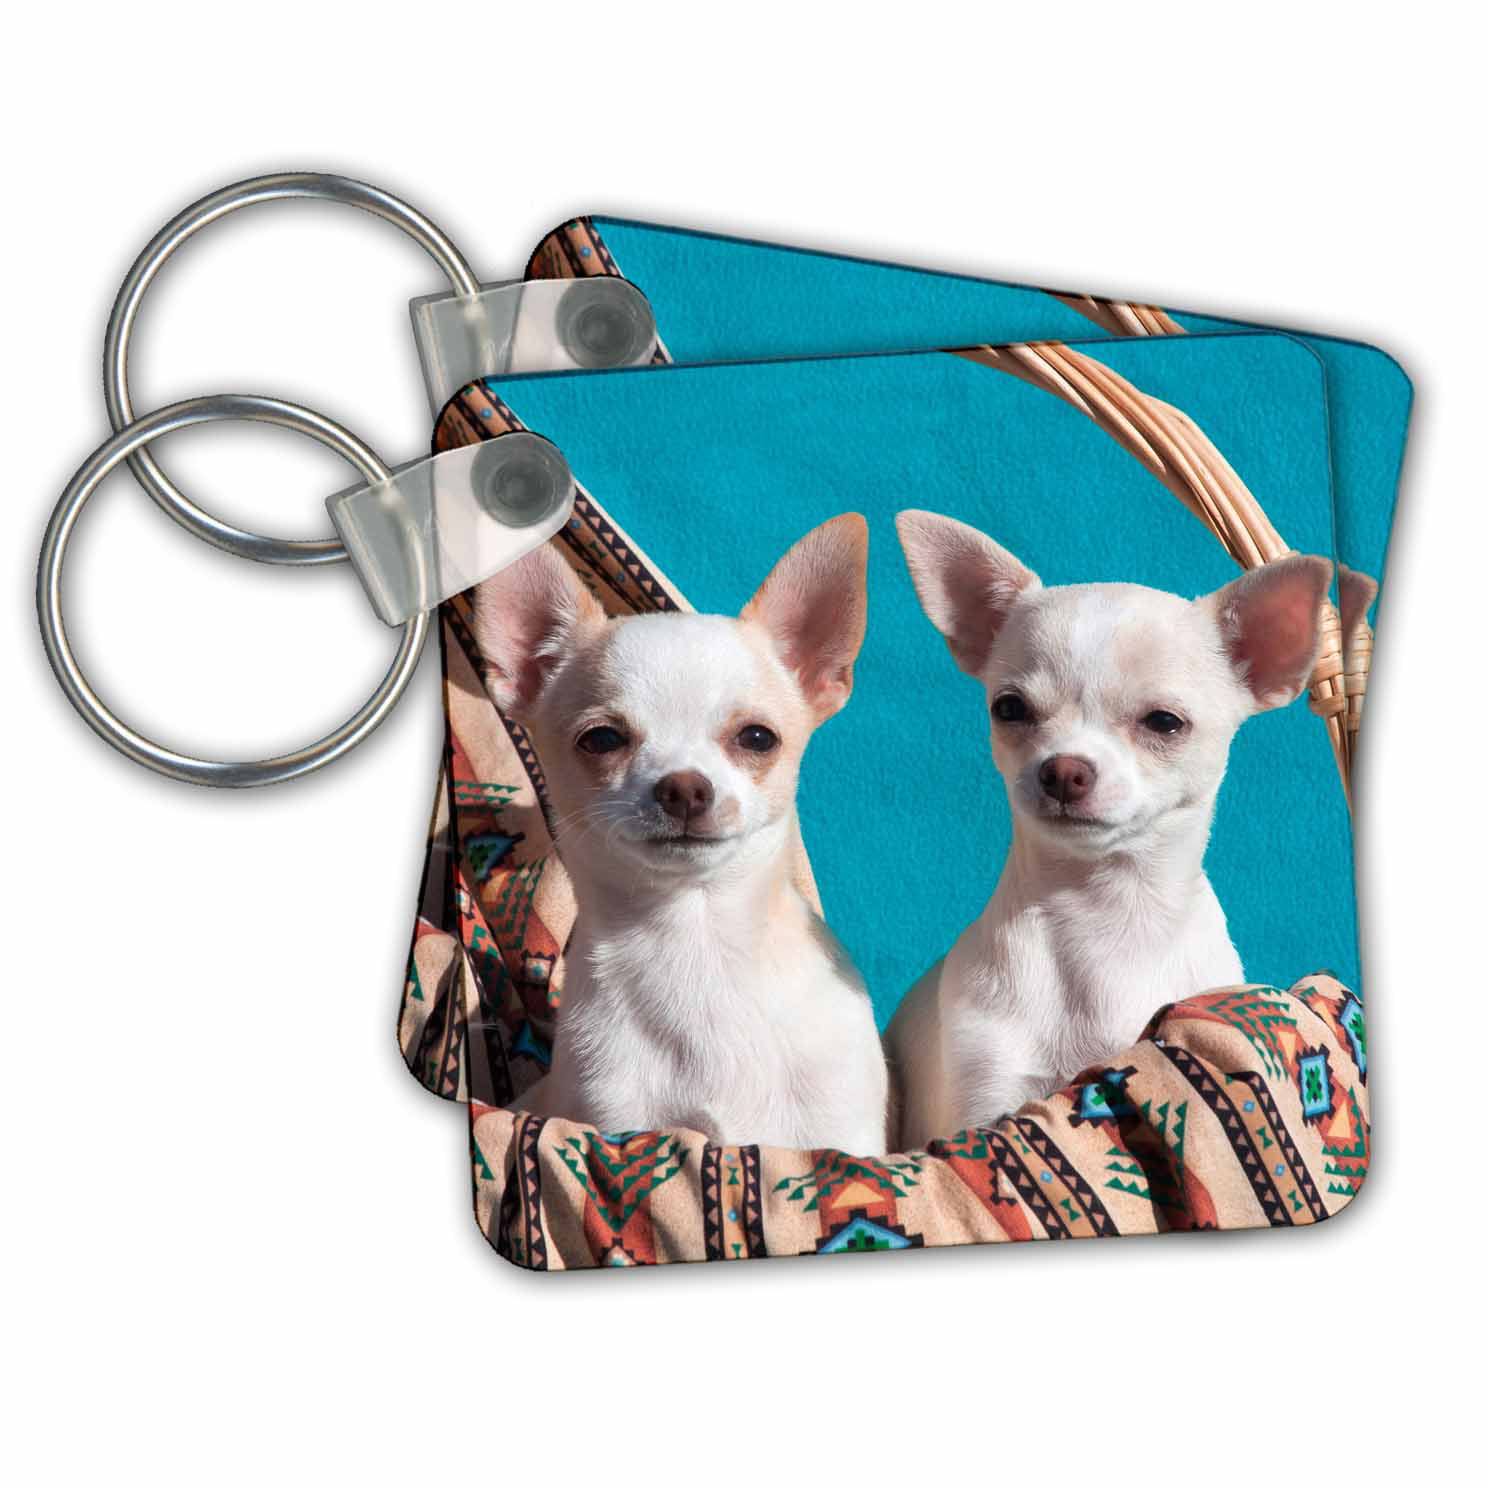 qs_92682_3 US32 JMR0502 Quilt Square 8 by 8-inch Julien McRoberts Santa Fe New Mexico 3dRose Toothless Chihuahua Dog 